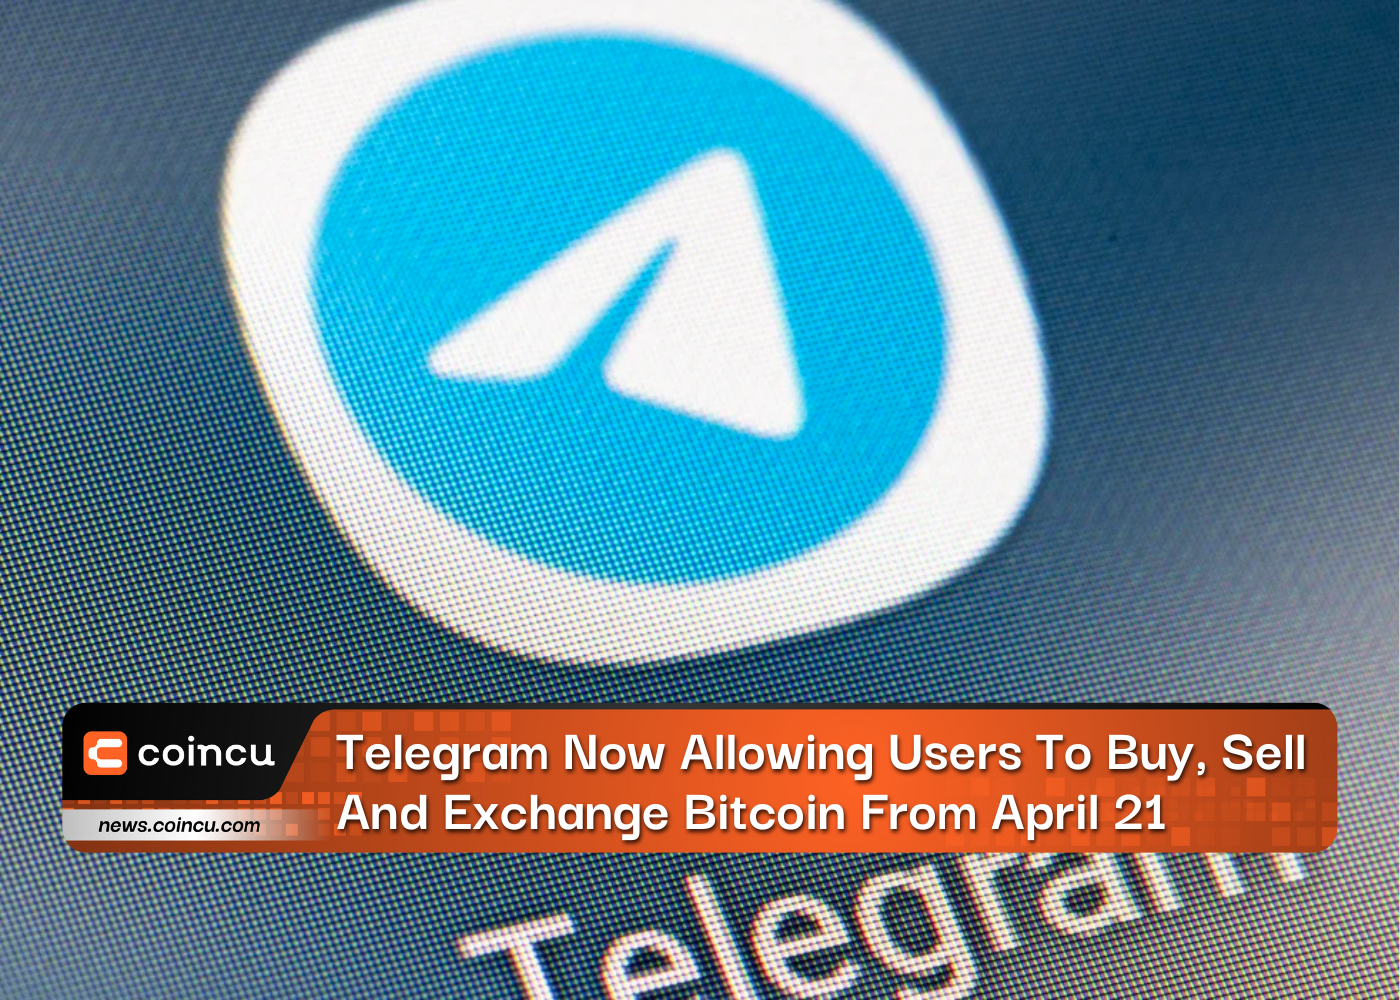 Telegram Now Allowing Users To Exchange Bitcoin From April 21